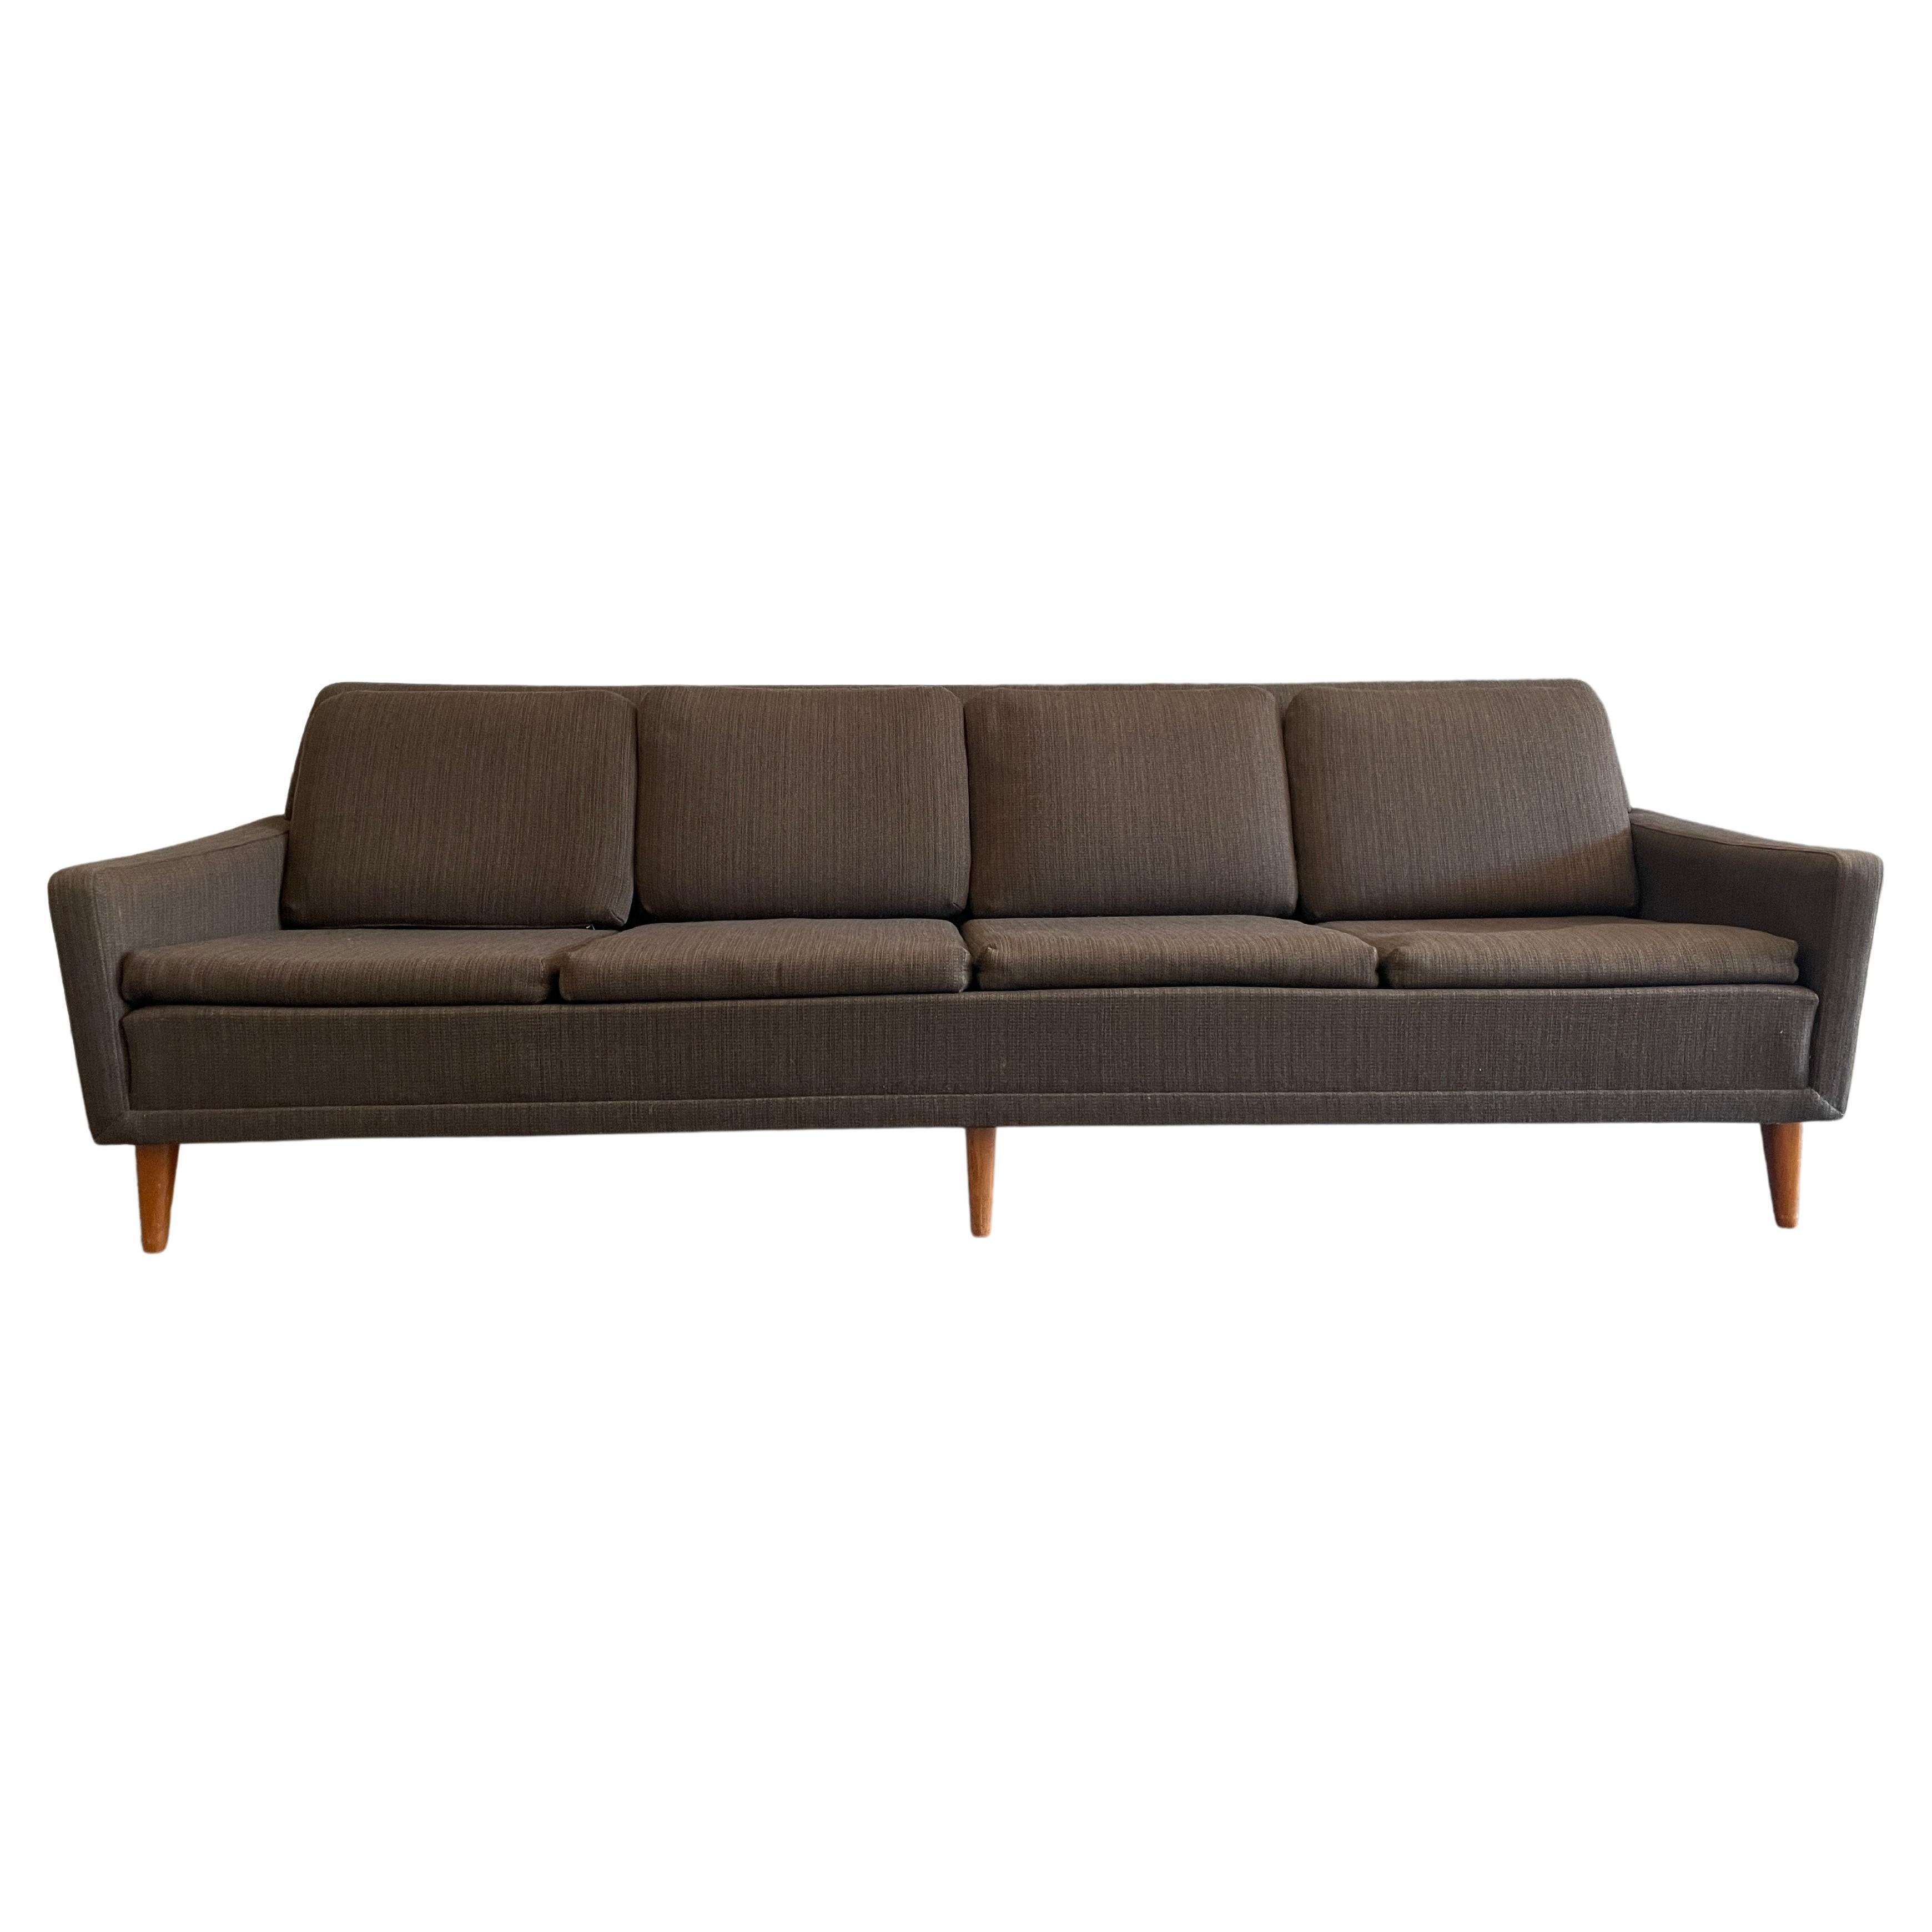 Mid-Century Modern Scandinavian low 4 Seat brown Sofa Couch by DUX